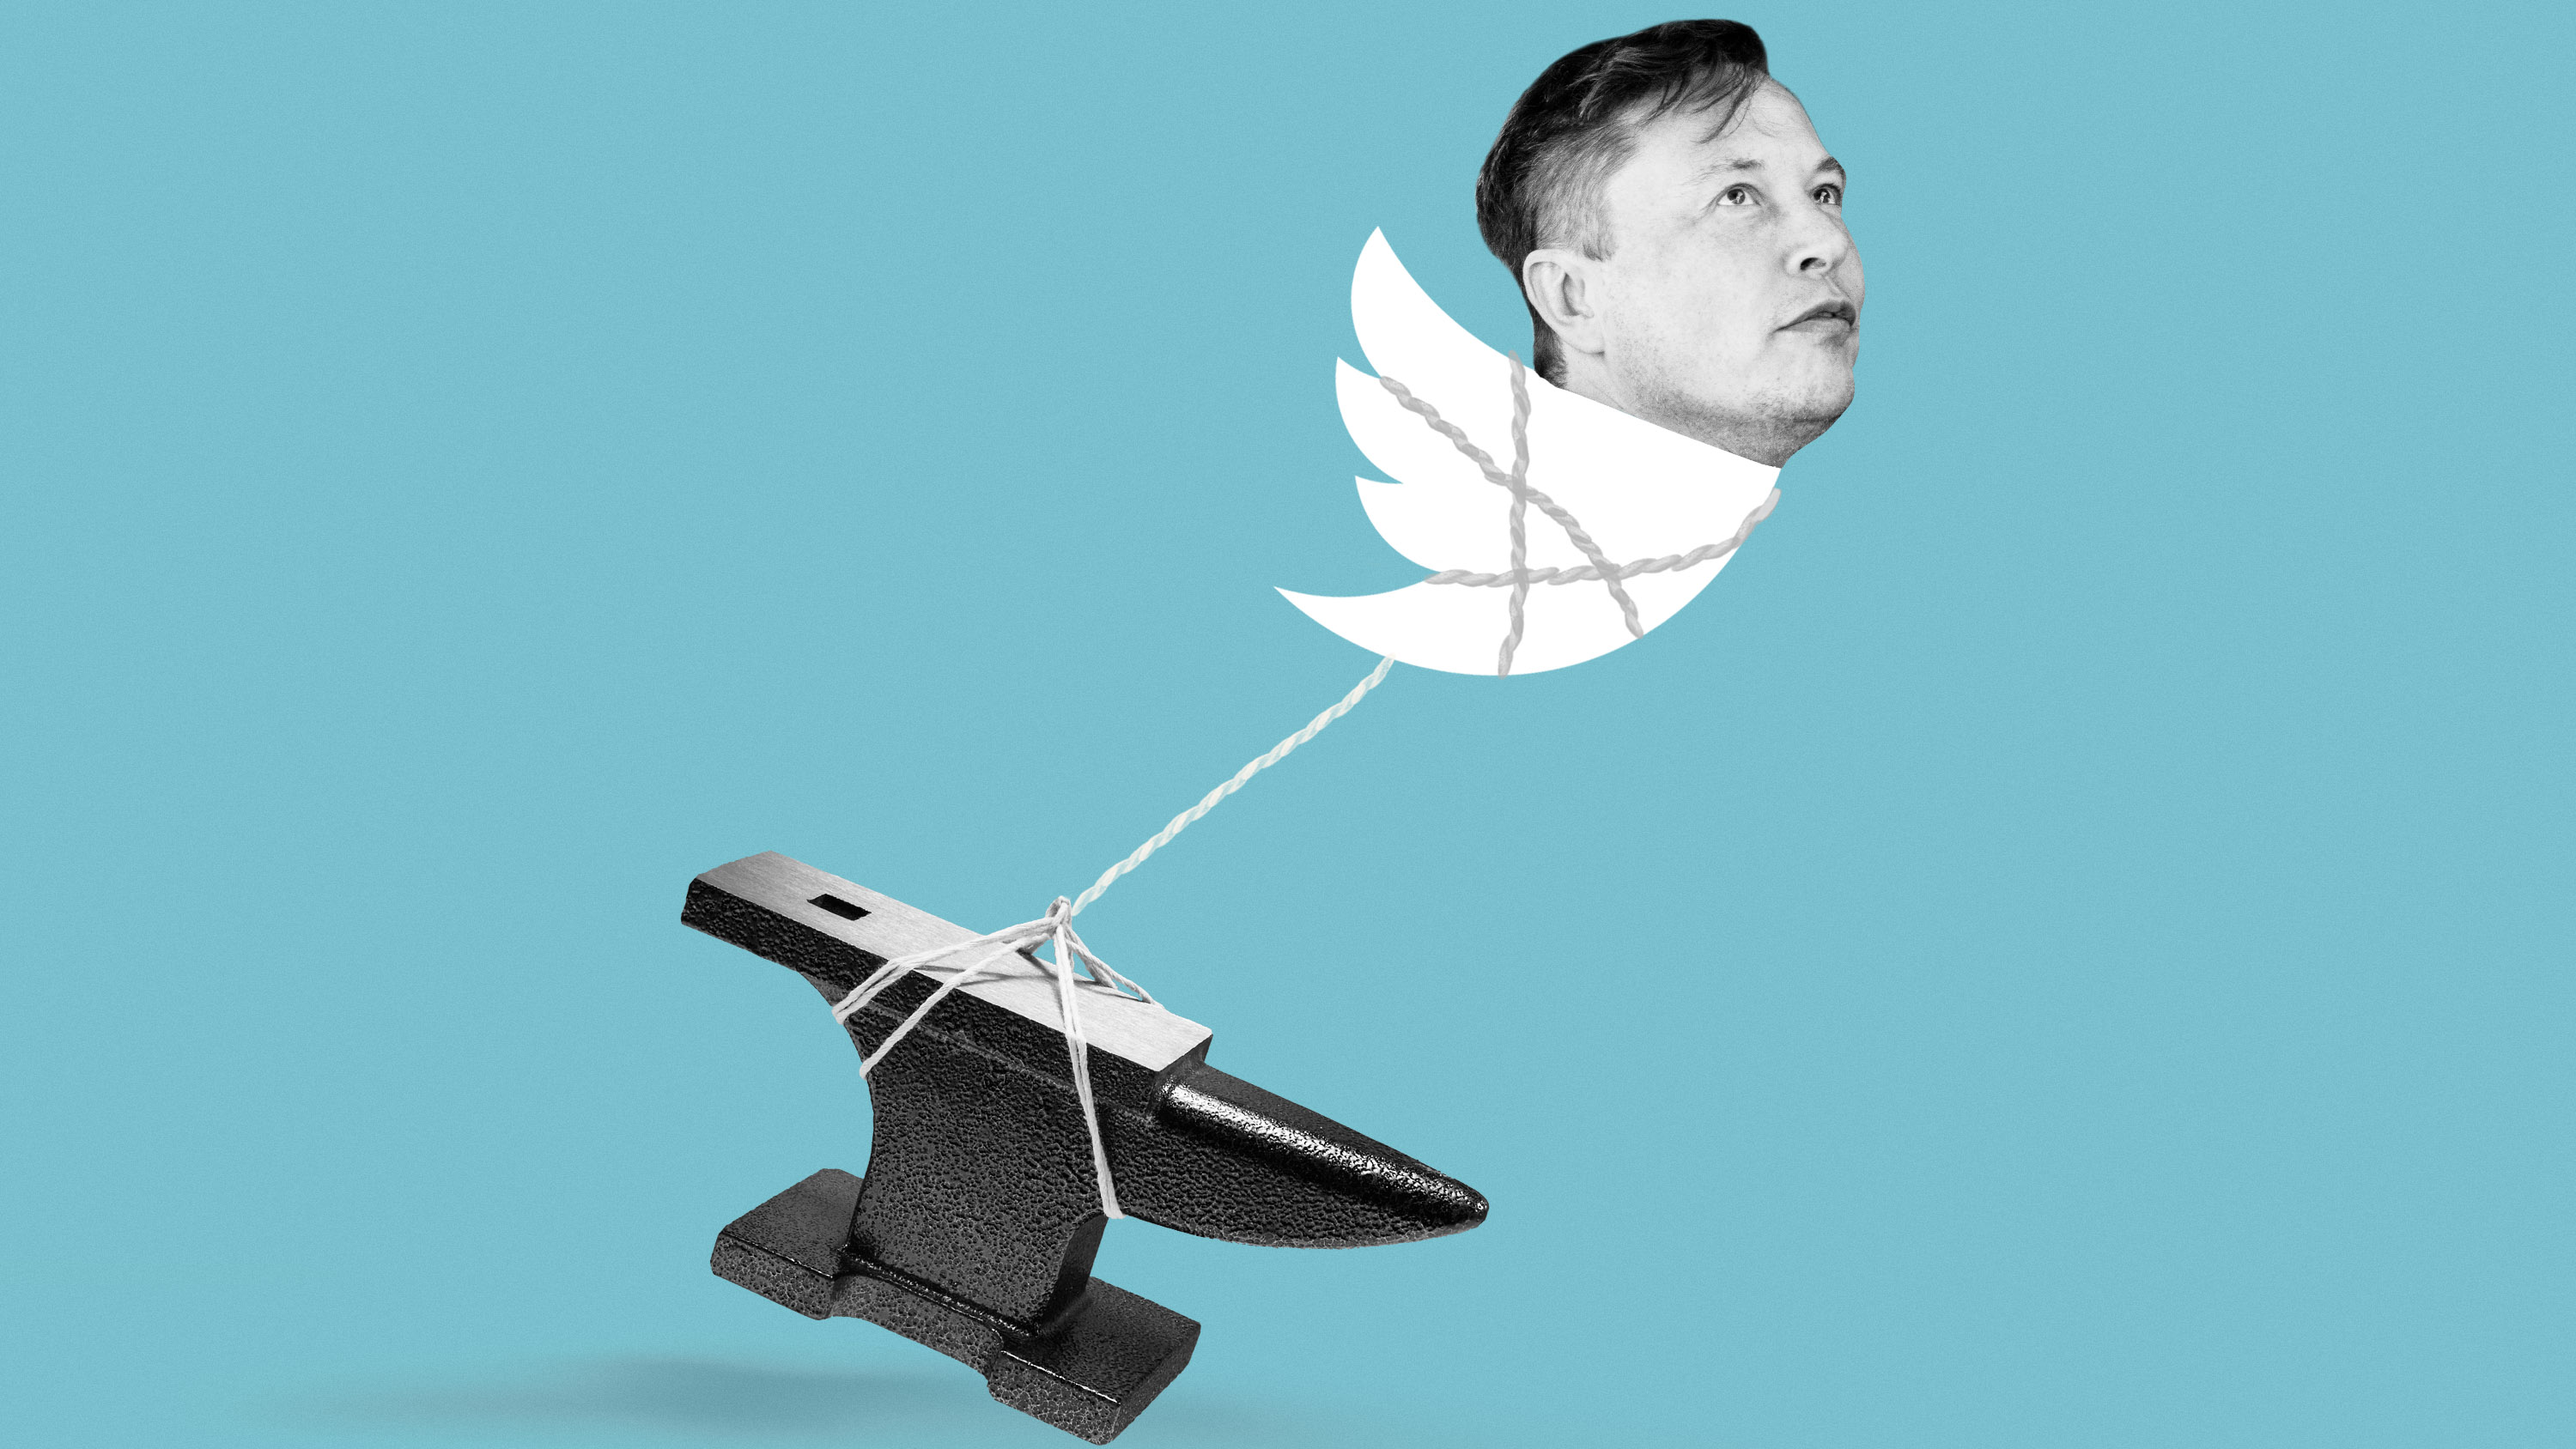 Elon Musk's head on Twitter icon which is tied to an anvil